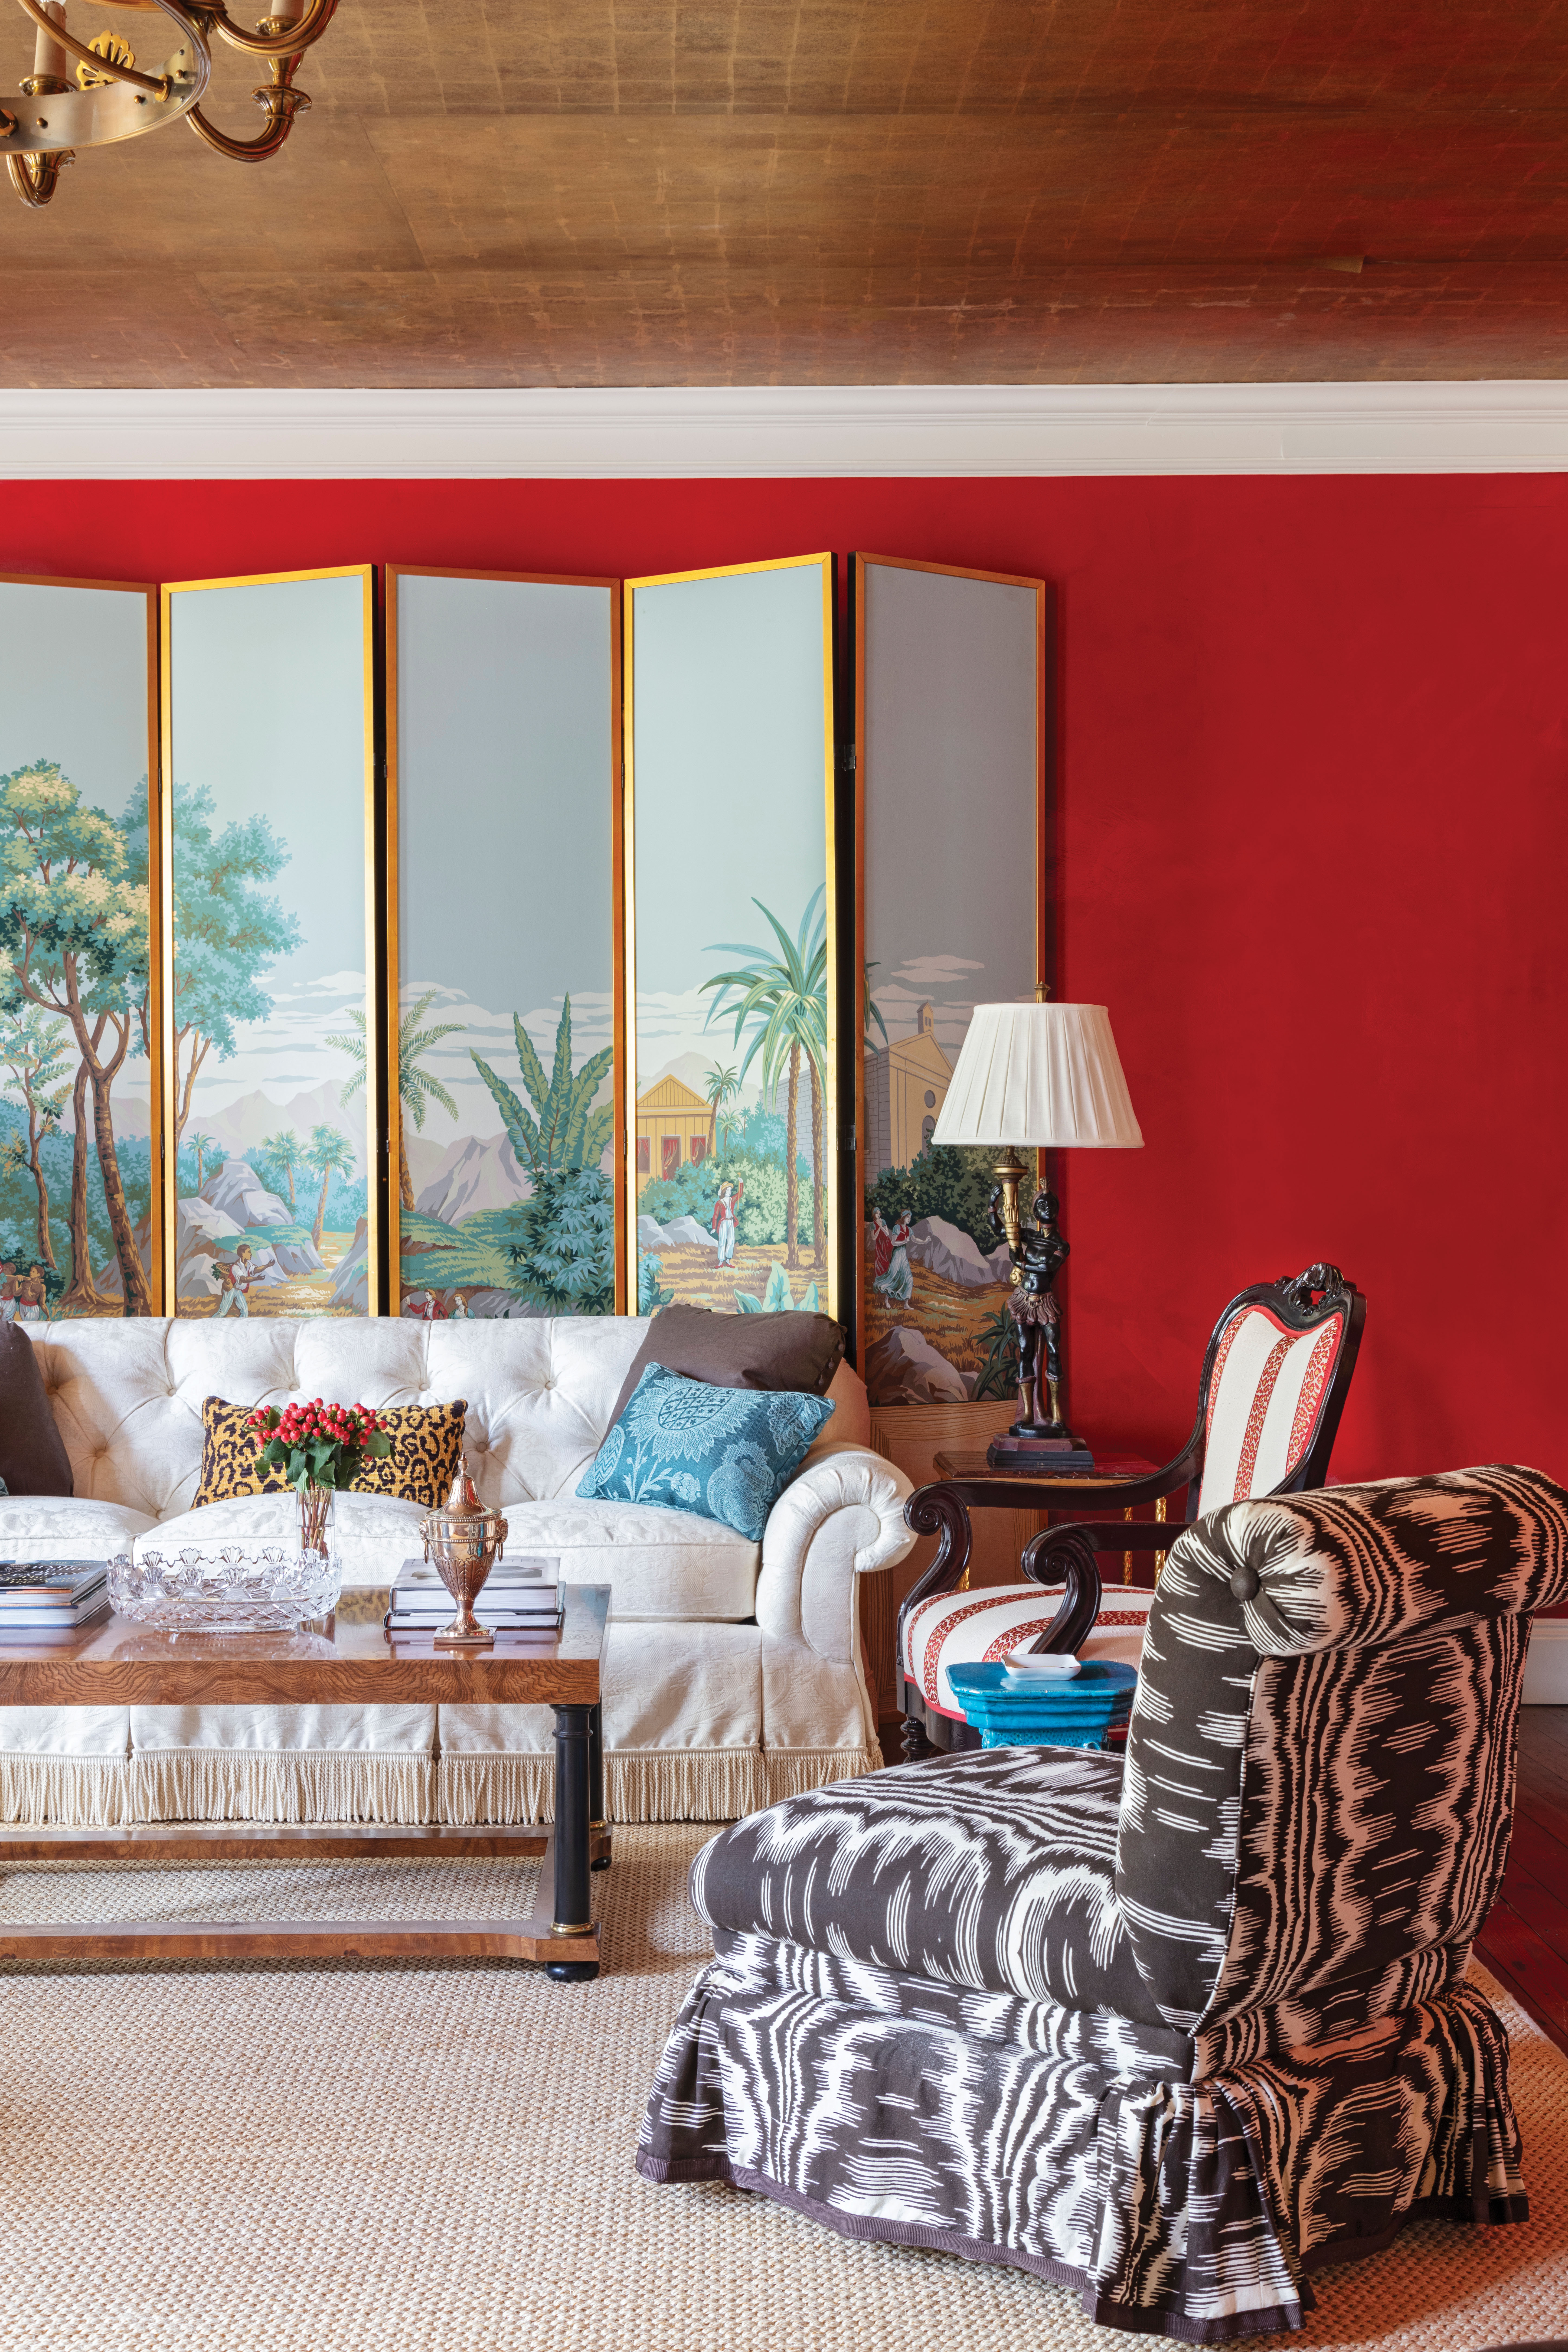 Killian balanced the bold space with geometric monochrome curtains in Raoul Textiles “Amore” fabric in “Mole,” chocolate velvet sofas trimmed in Lee Jofa bullion fringe, and vintage elephant side tables from Palm Beach.